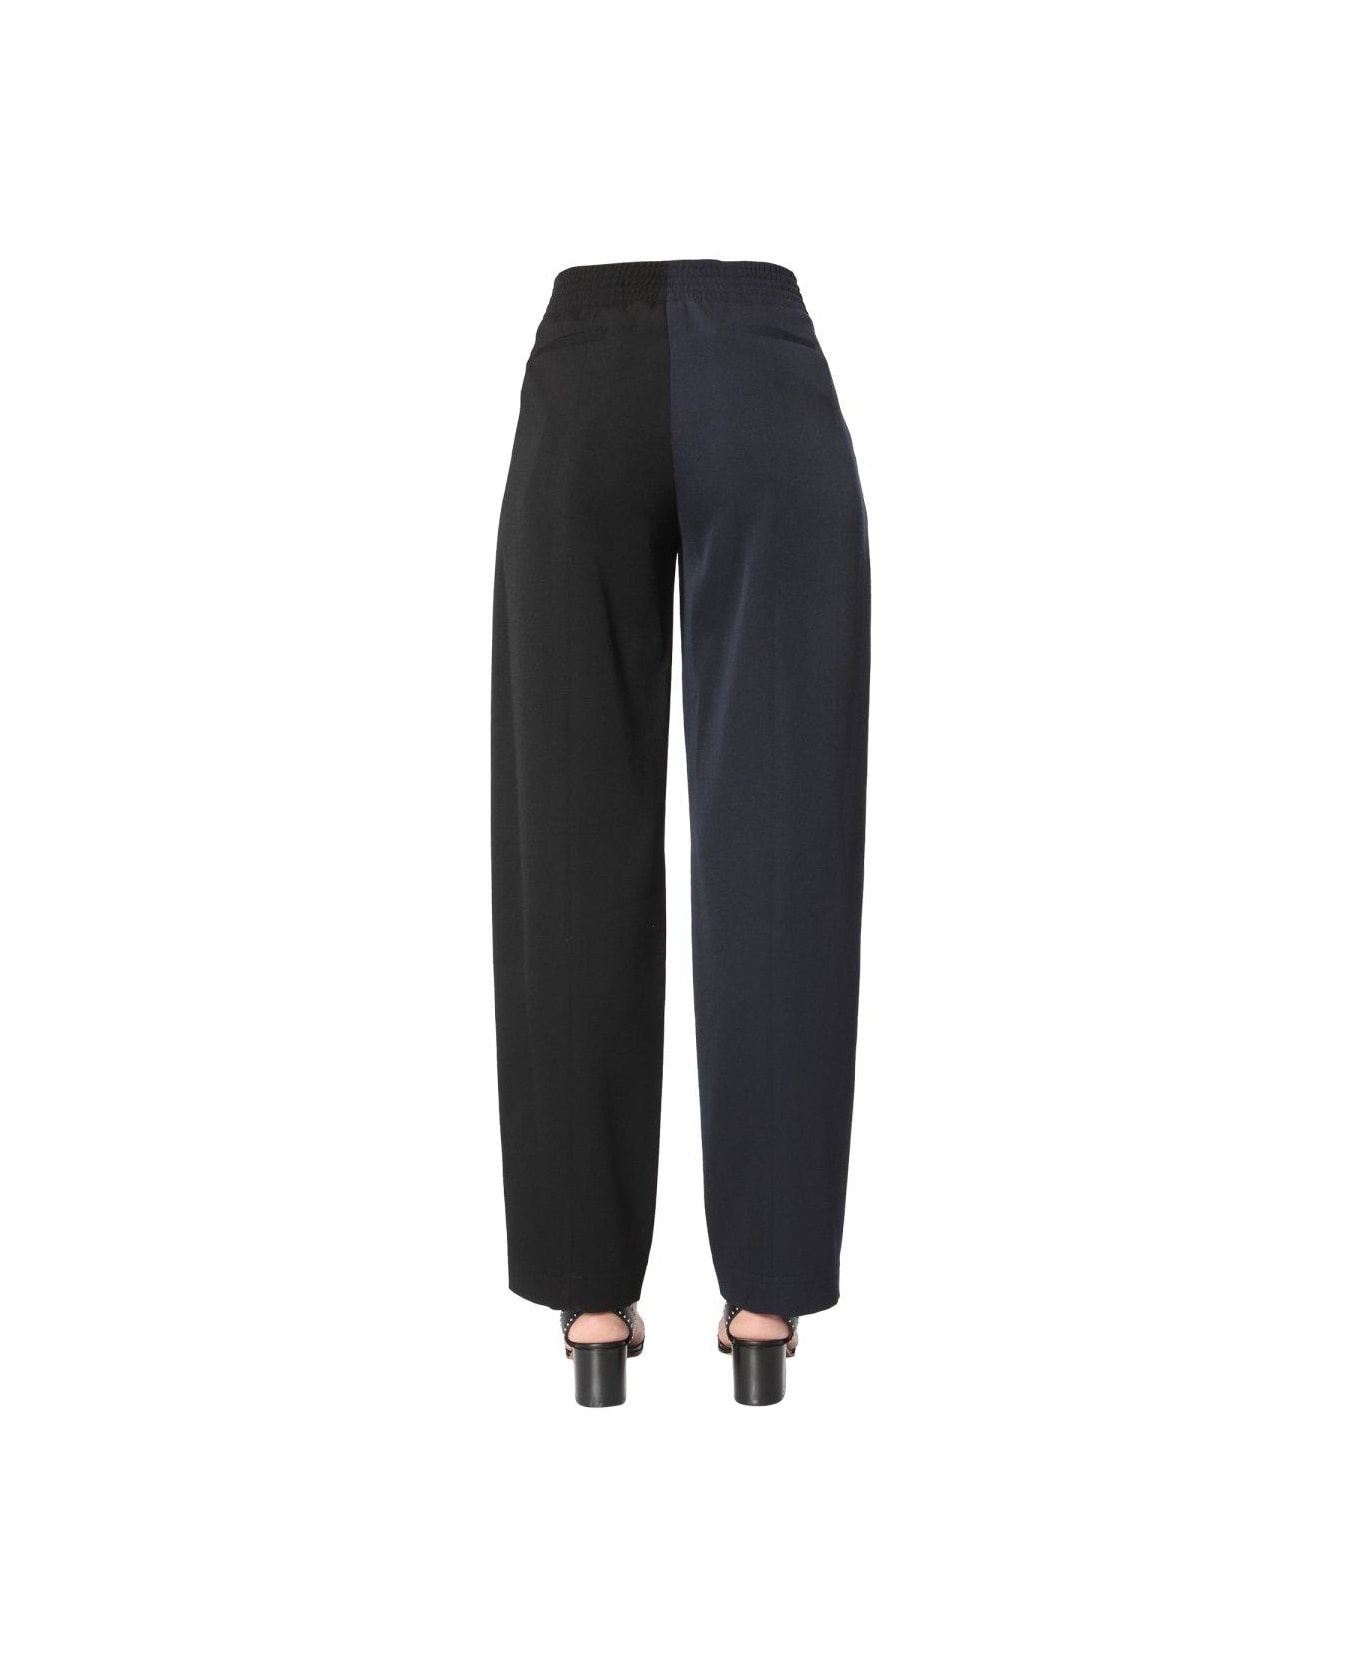 Givenchy Contrasting Panelled Trousers - BLUE ボトムス